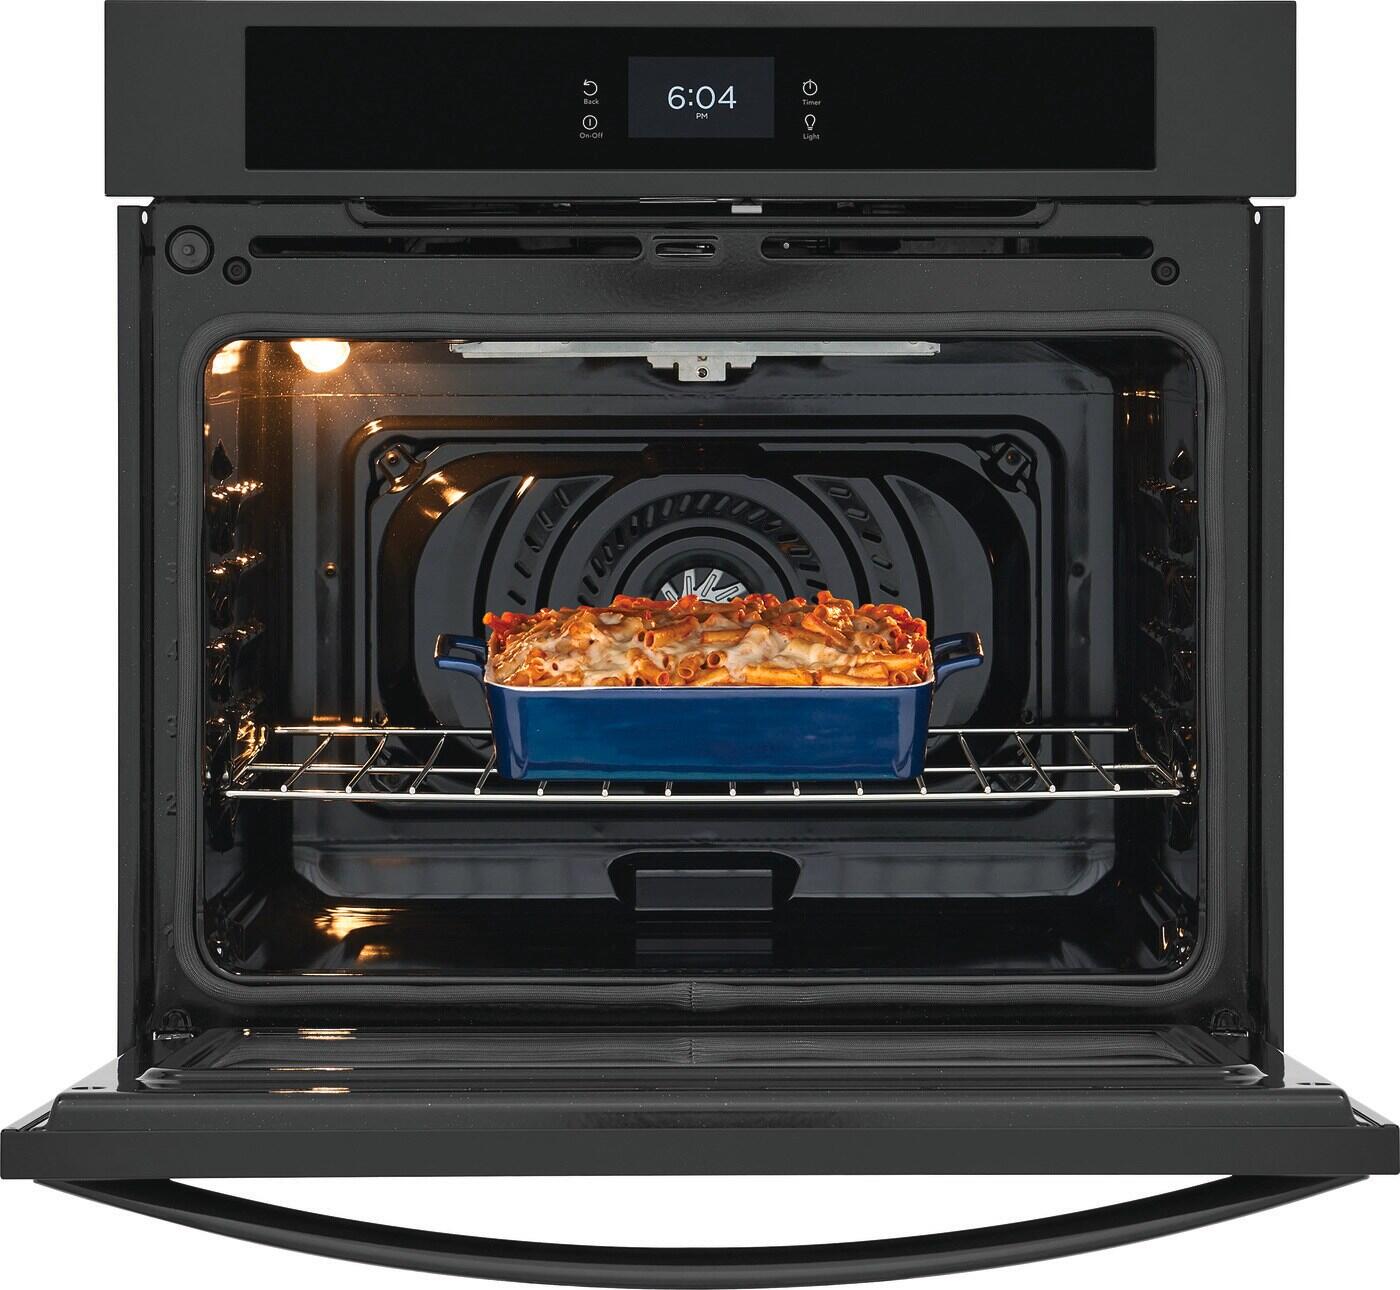 Review and Test of the WOLF Gourmet Countertop Oven  Is It Worth It ($$$)  After 8 Months of Use 